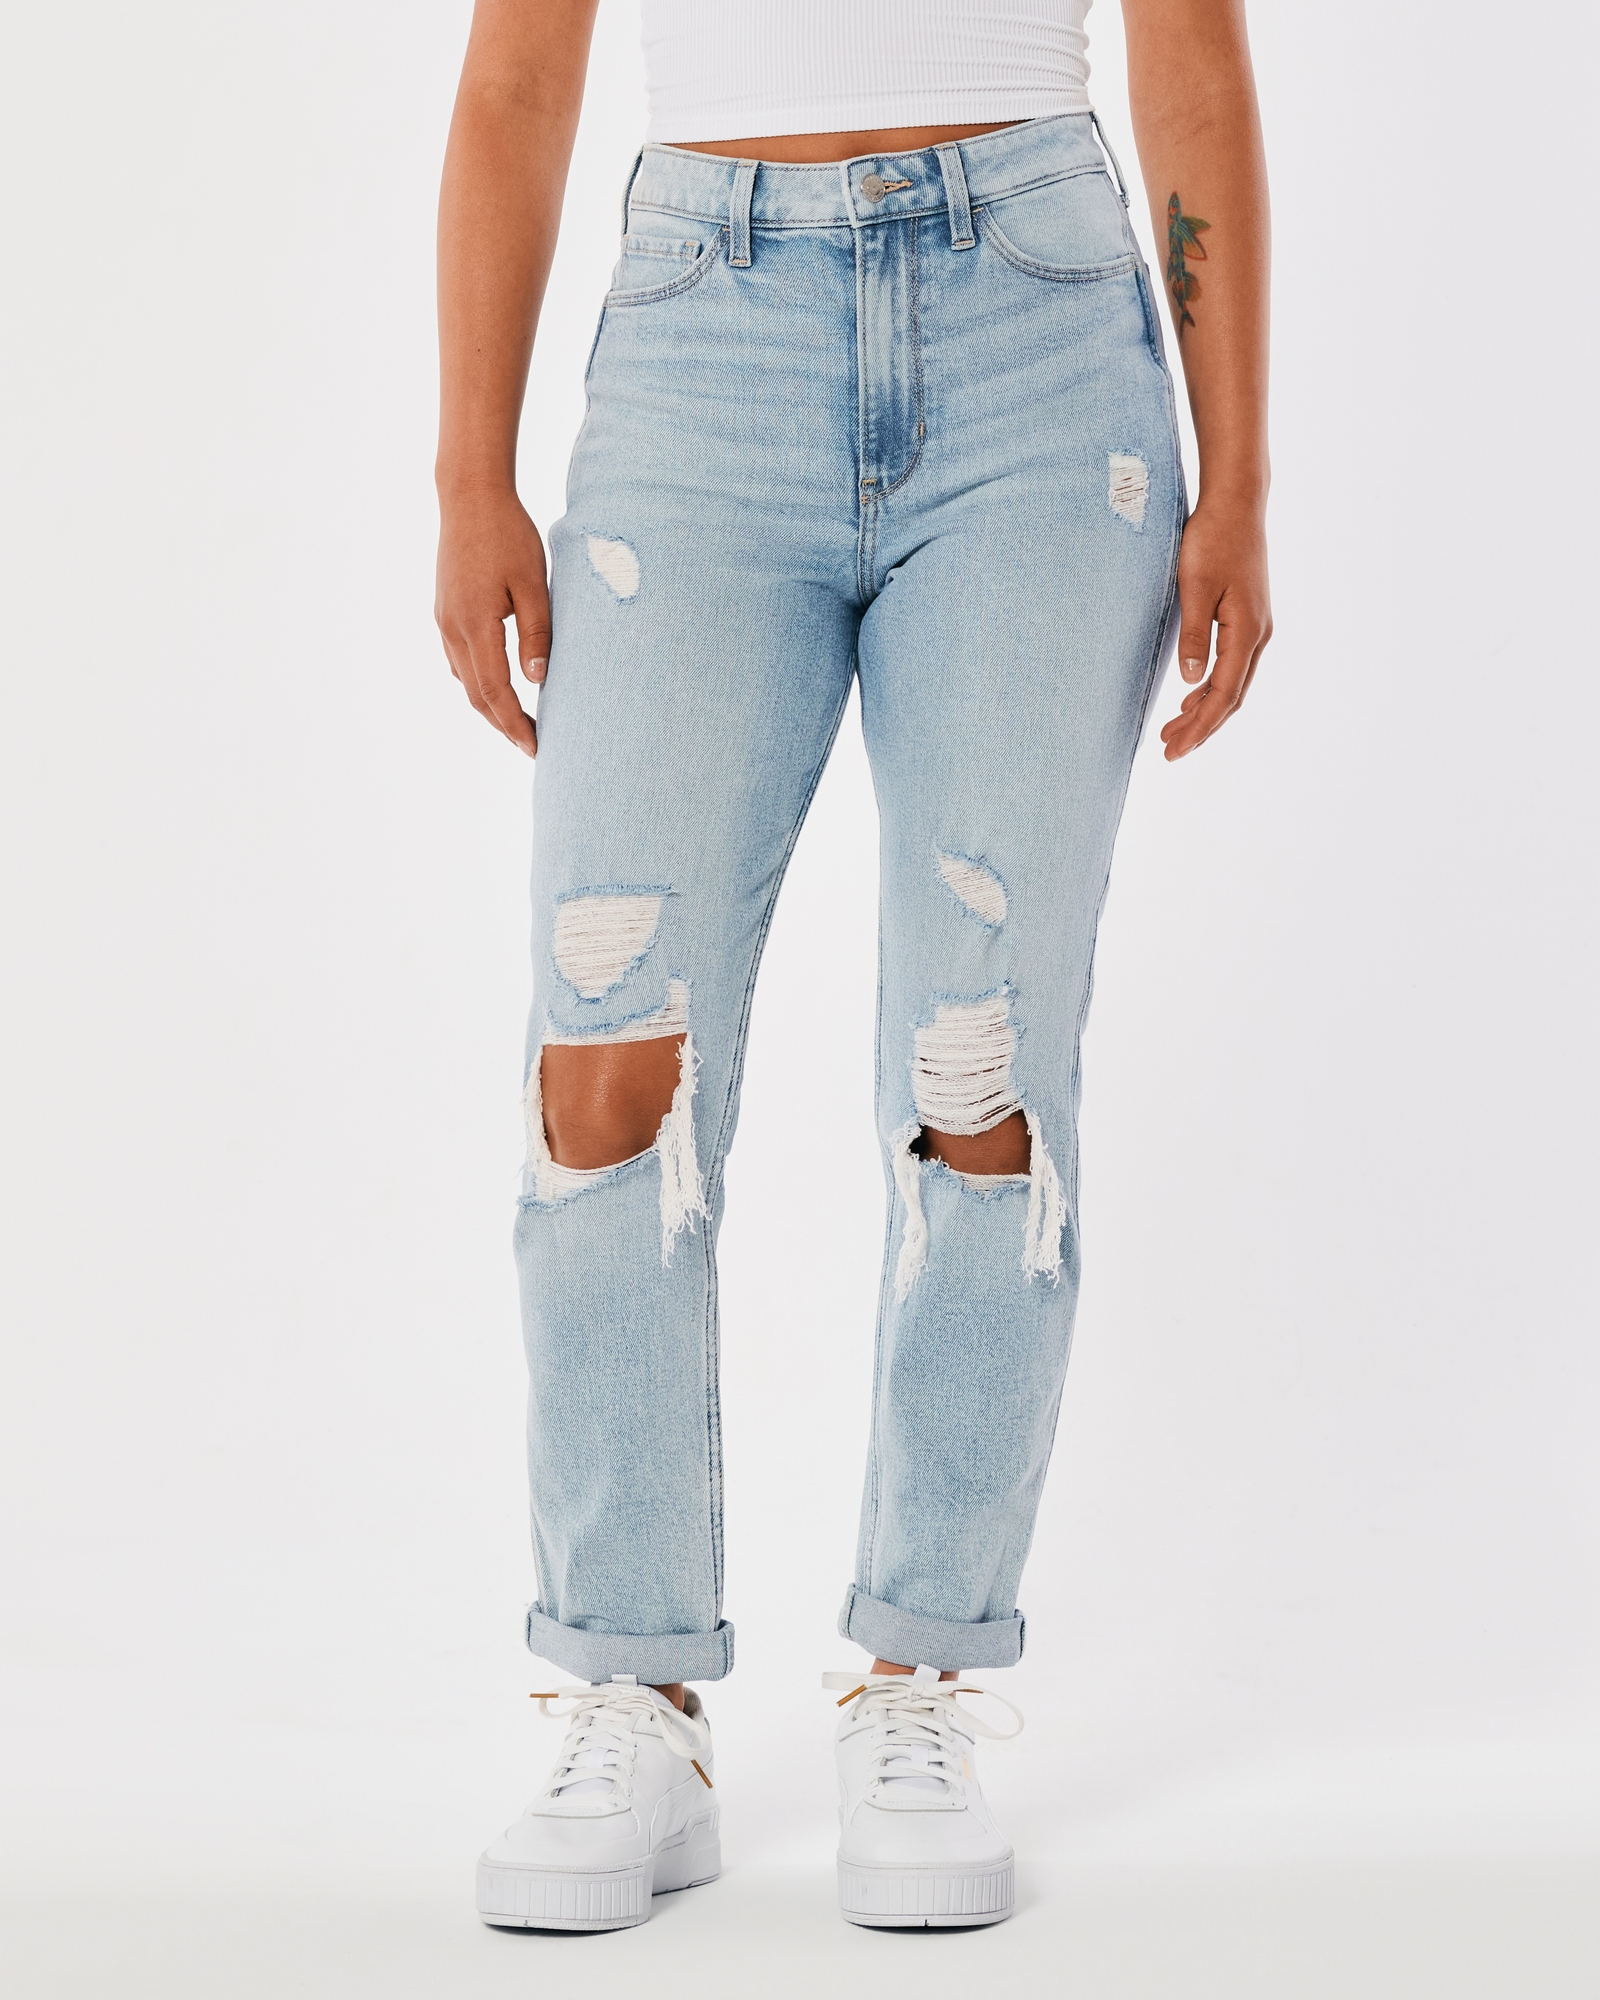 Hollister BRAND NEW Mom Jeans Size 24 - $45 (18% Off Retail) New With Tags  - From Kaitlin